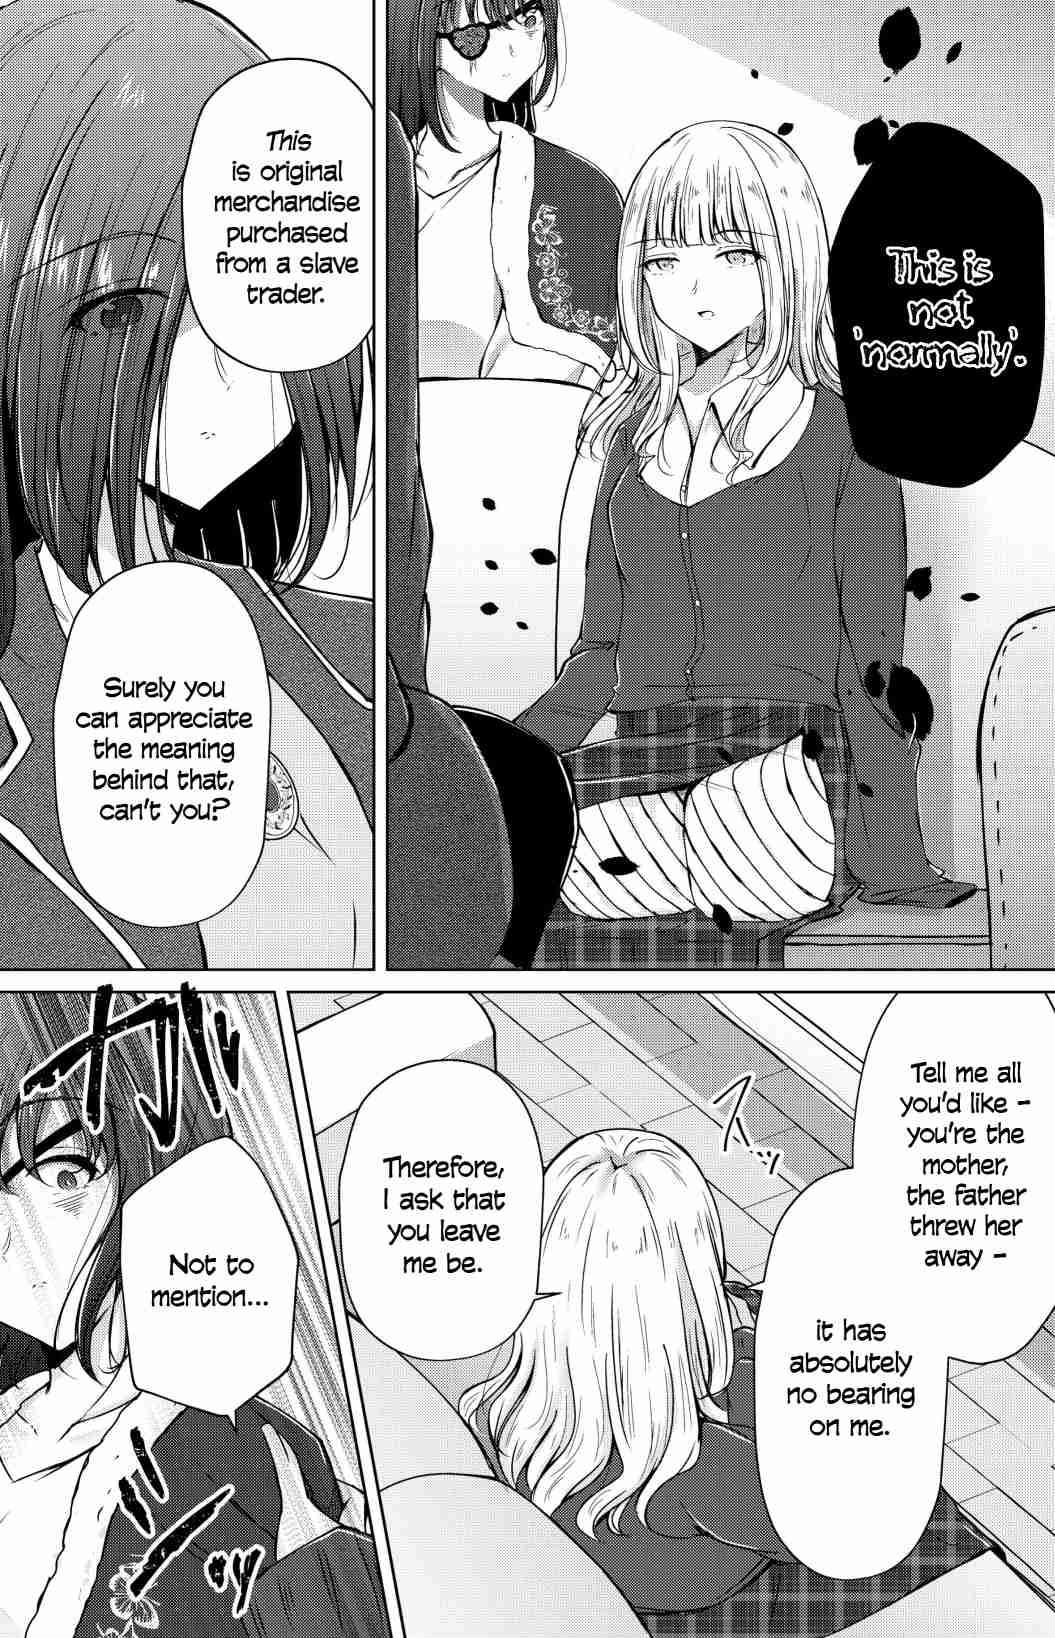 And Kaede Blooms Gorgeously Ch. 11